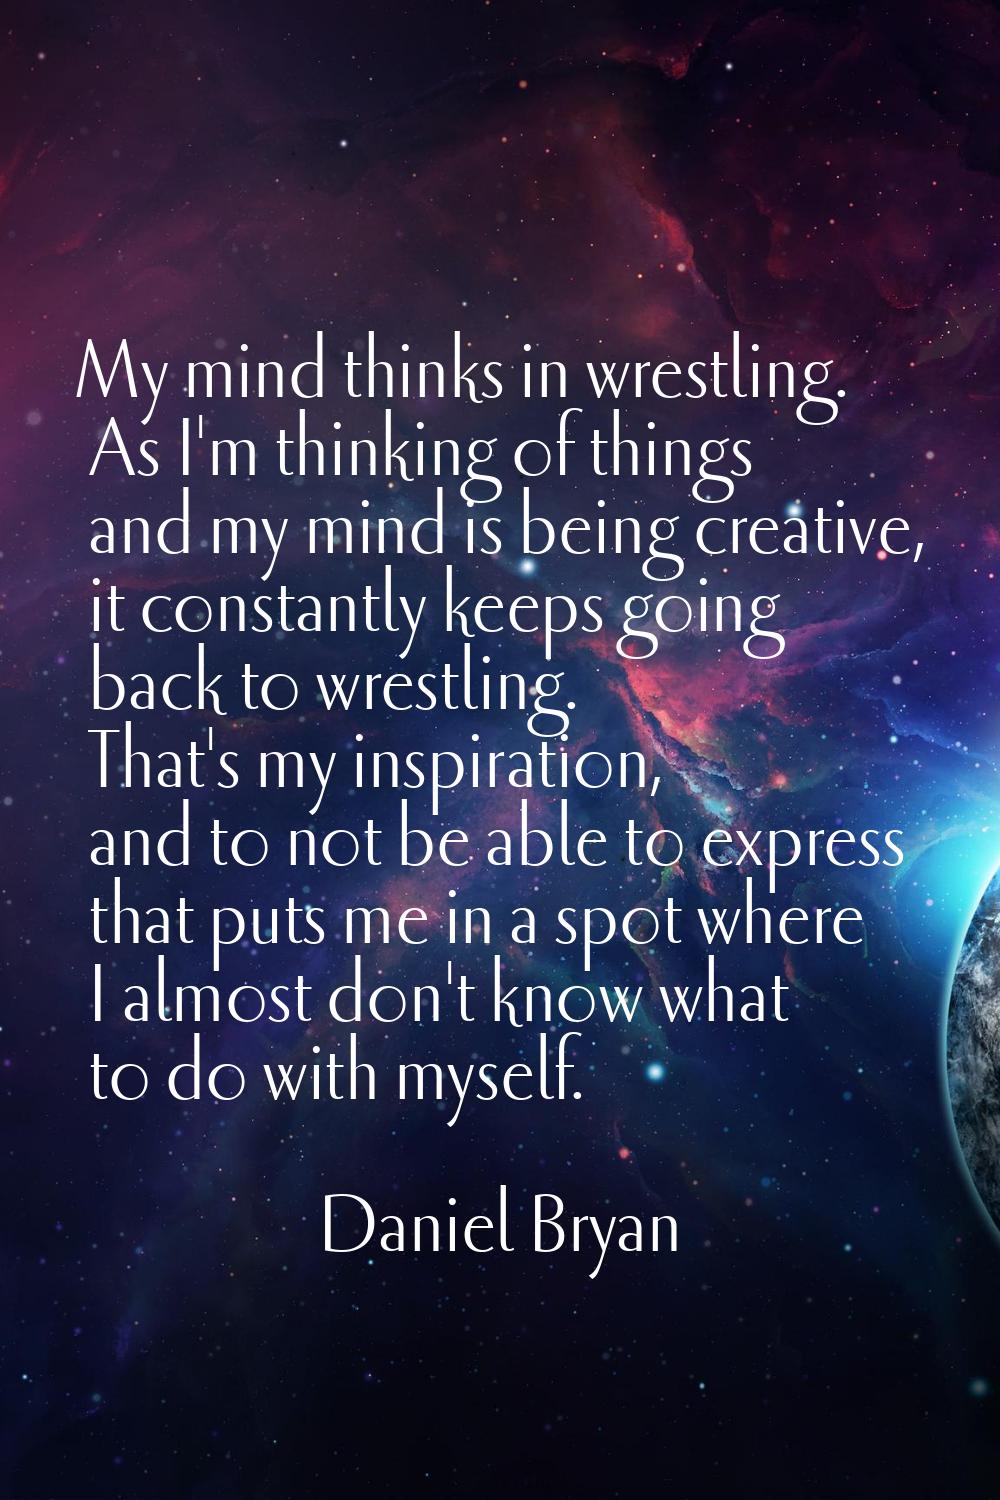 My mind thinks in wrestling. As I'm thinking of things and my mind is being creative, it constantly